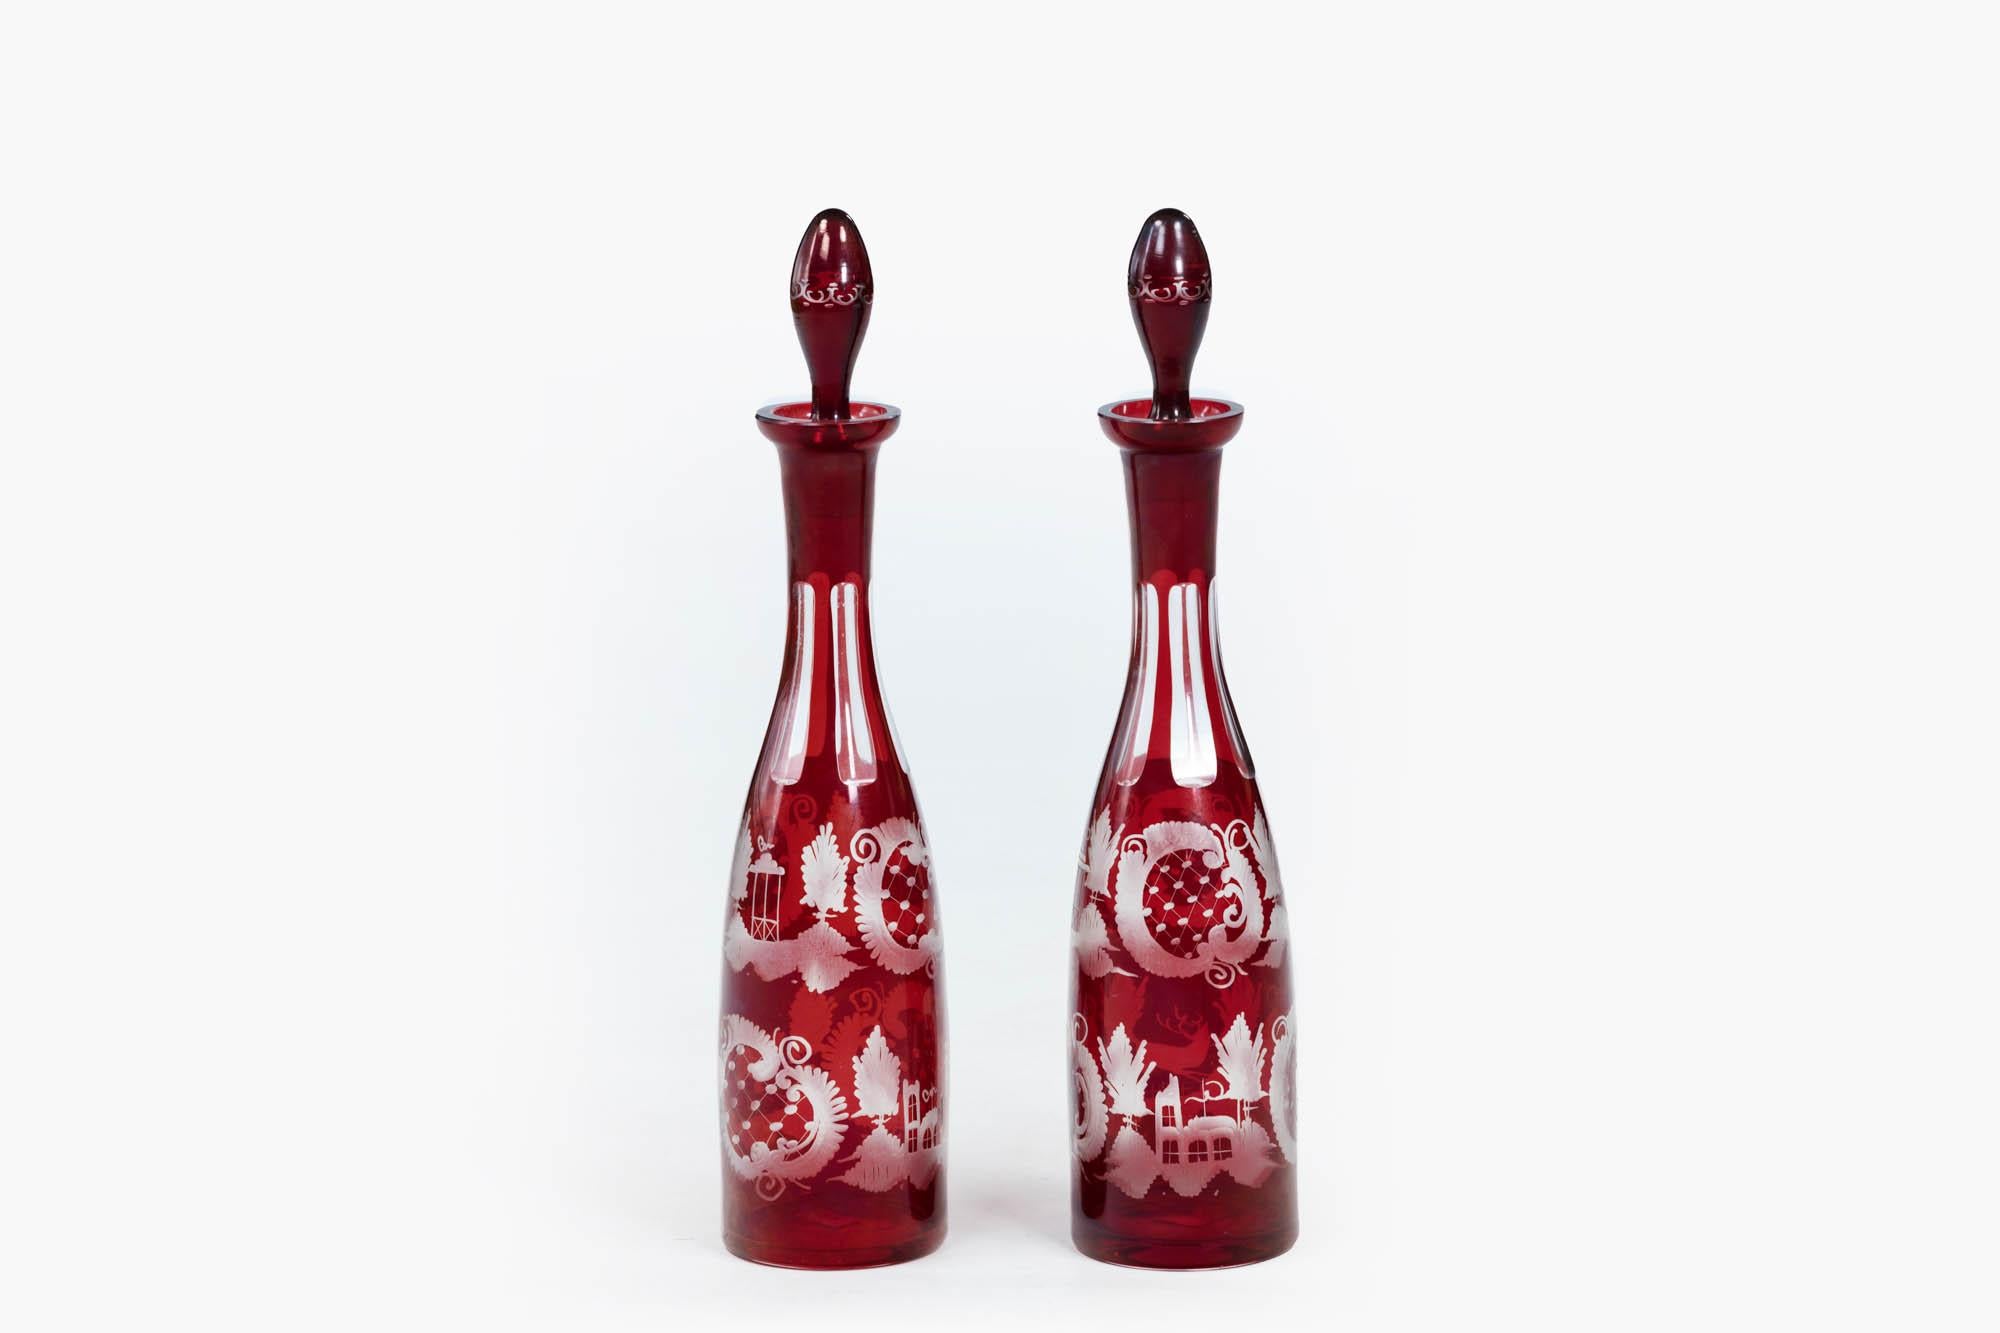 19th Century pair Egermann Bohemian Czech ruby glazed and engraved glass decanters, of tall slender form, cut to clear, complete with original firm fitting stoppers. The pair feature Egermann’s popular deer and castle theme decoration.